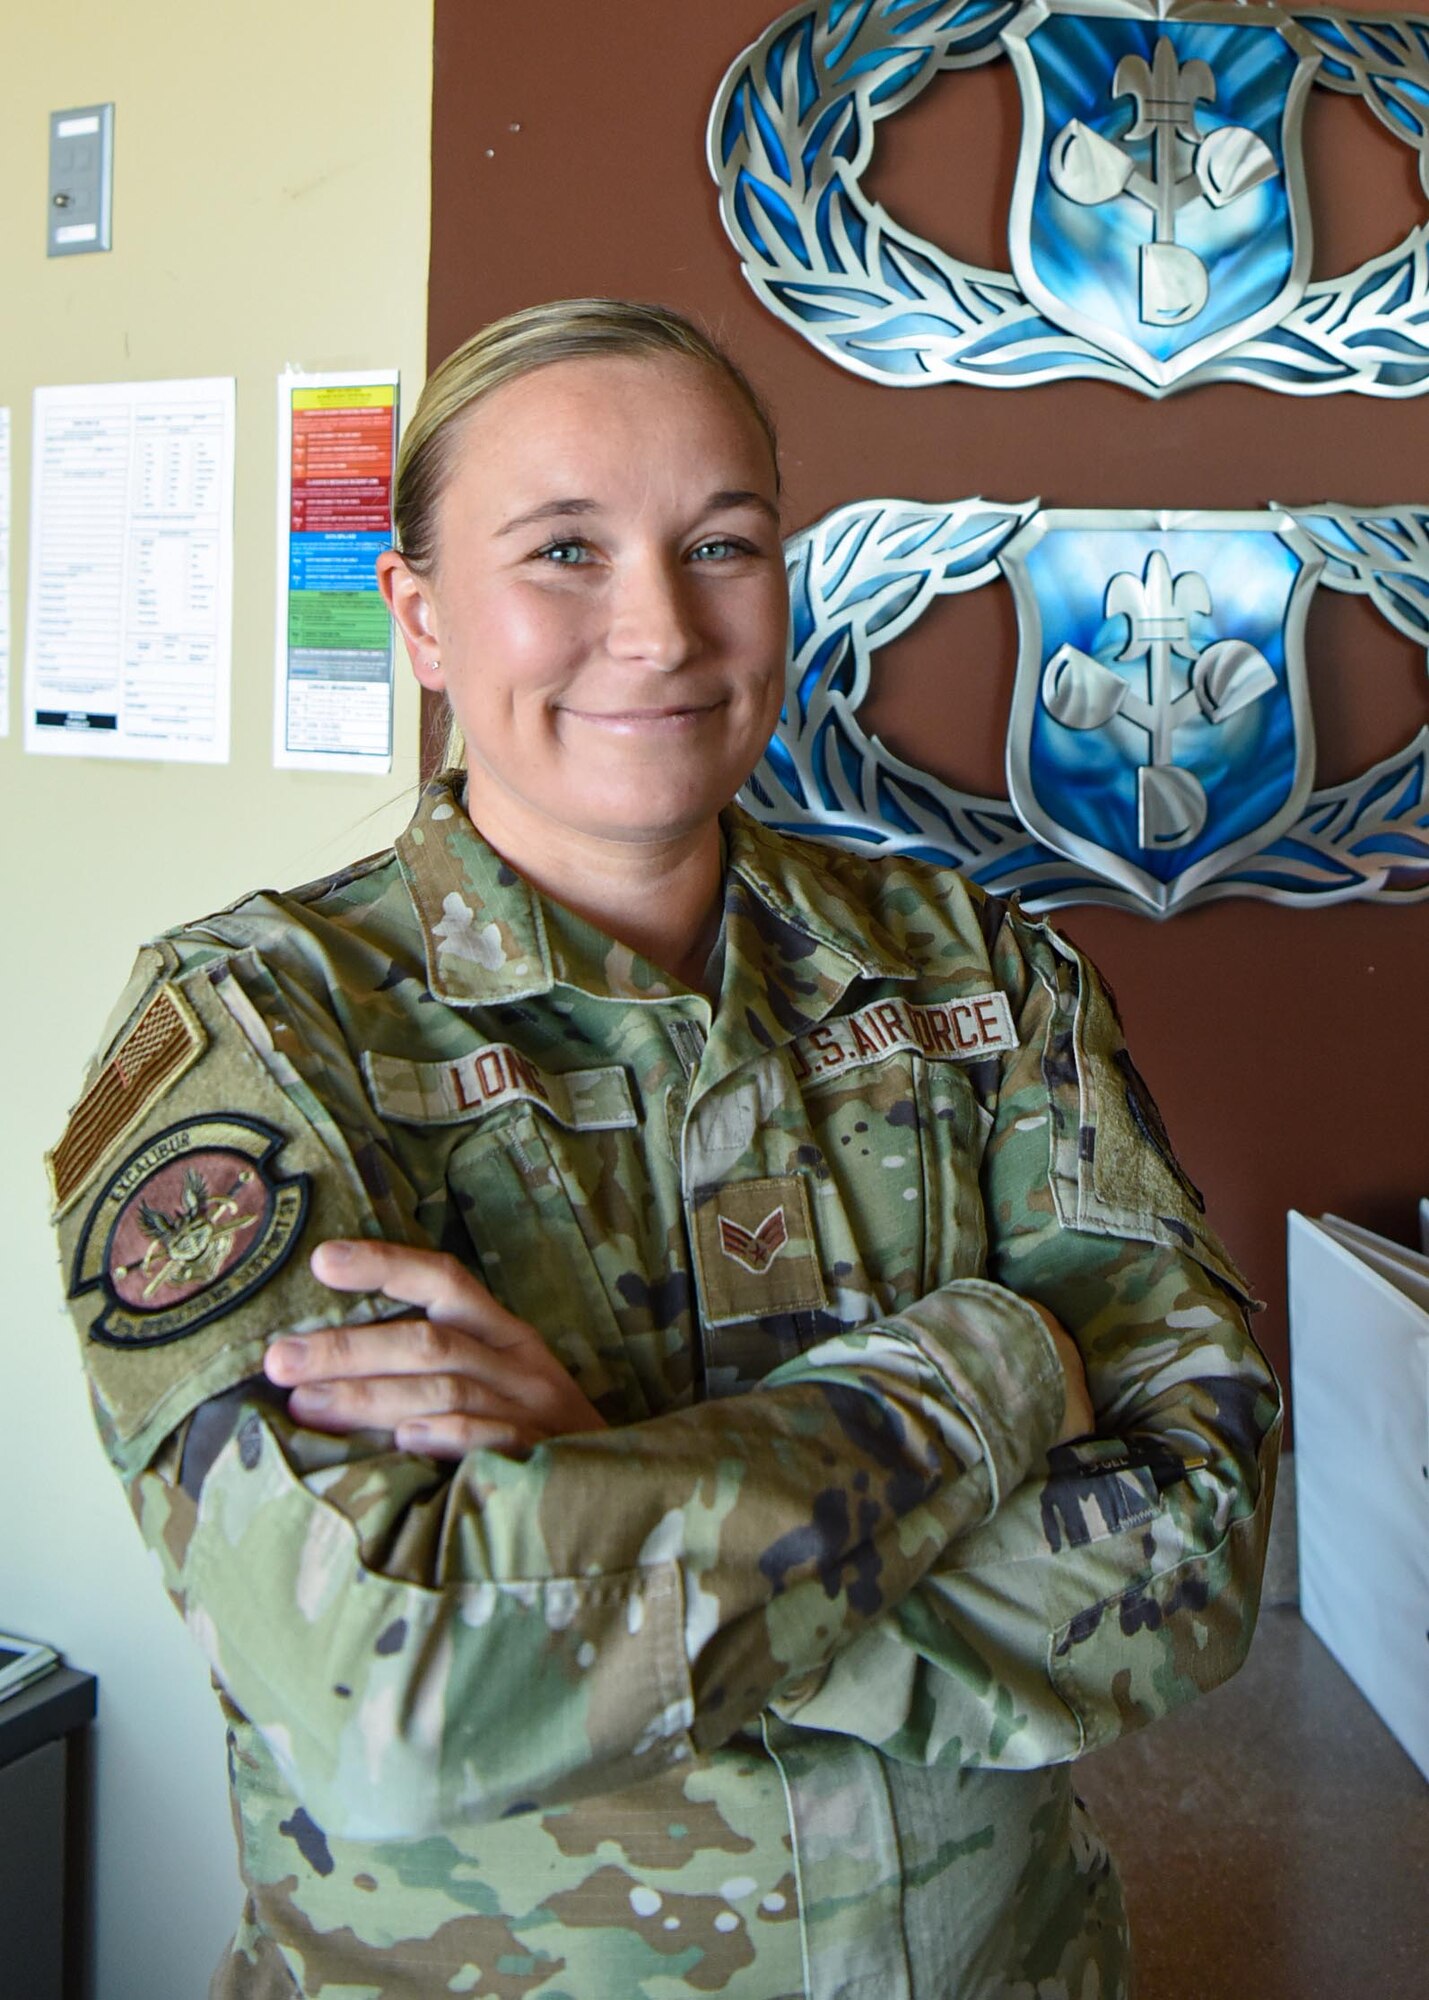 Senior Airman Christina Long, 5th Operations Support Squadron weather forecaster, poses for a photo in her office at Minot Air Force Base, North Dakota, April 7, 2023. A weather Airman’s duties primarily involve integrating current and forecasted atmospheric and space weather conditions into operations and planning.  (U.S. Air Force photo by Senior Airman Caleb S. Kimmell)